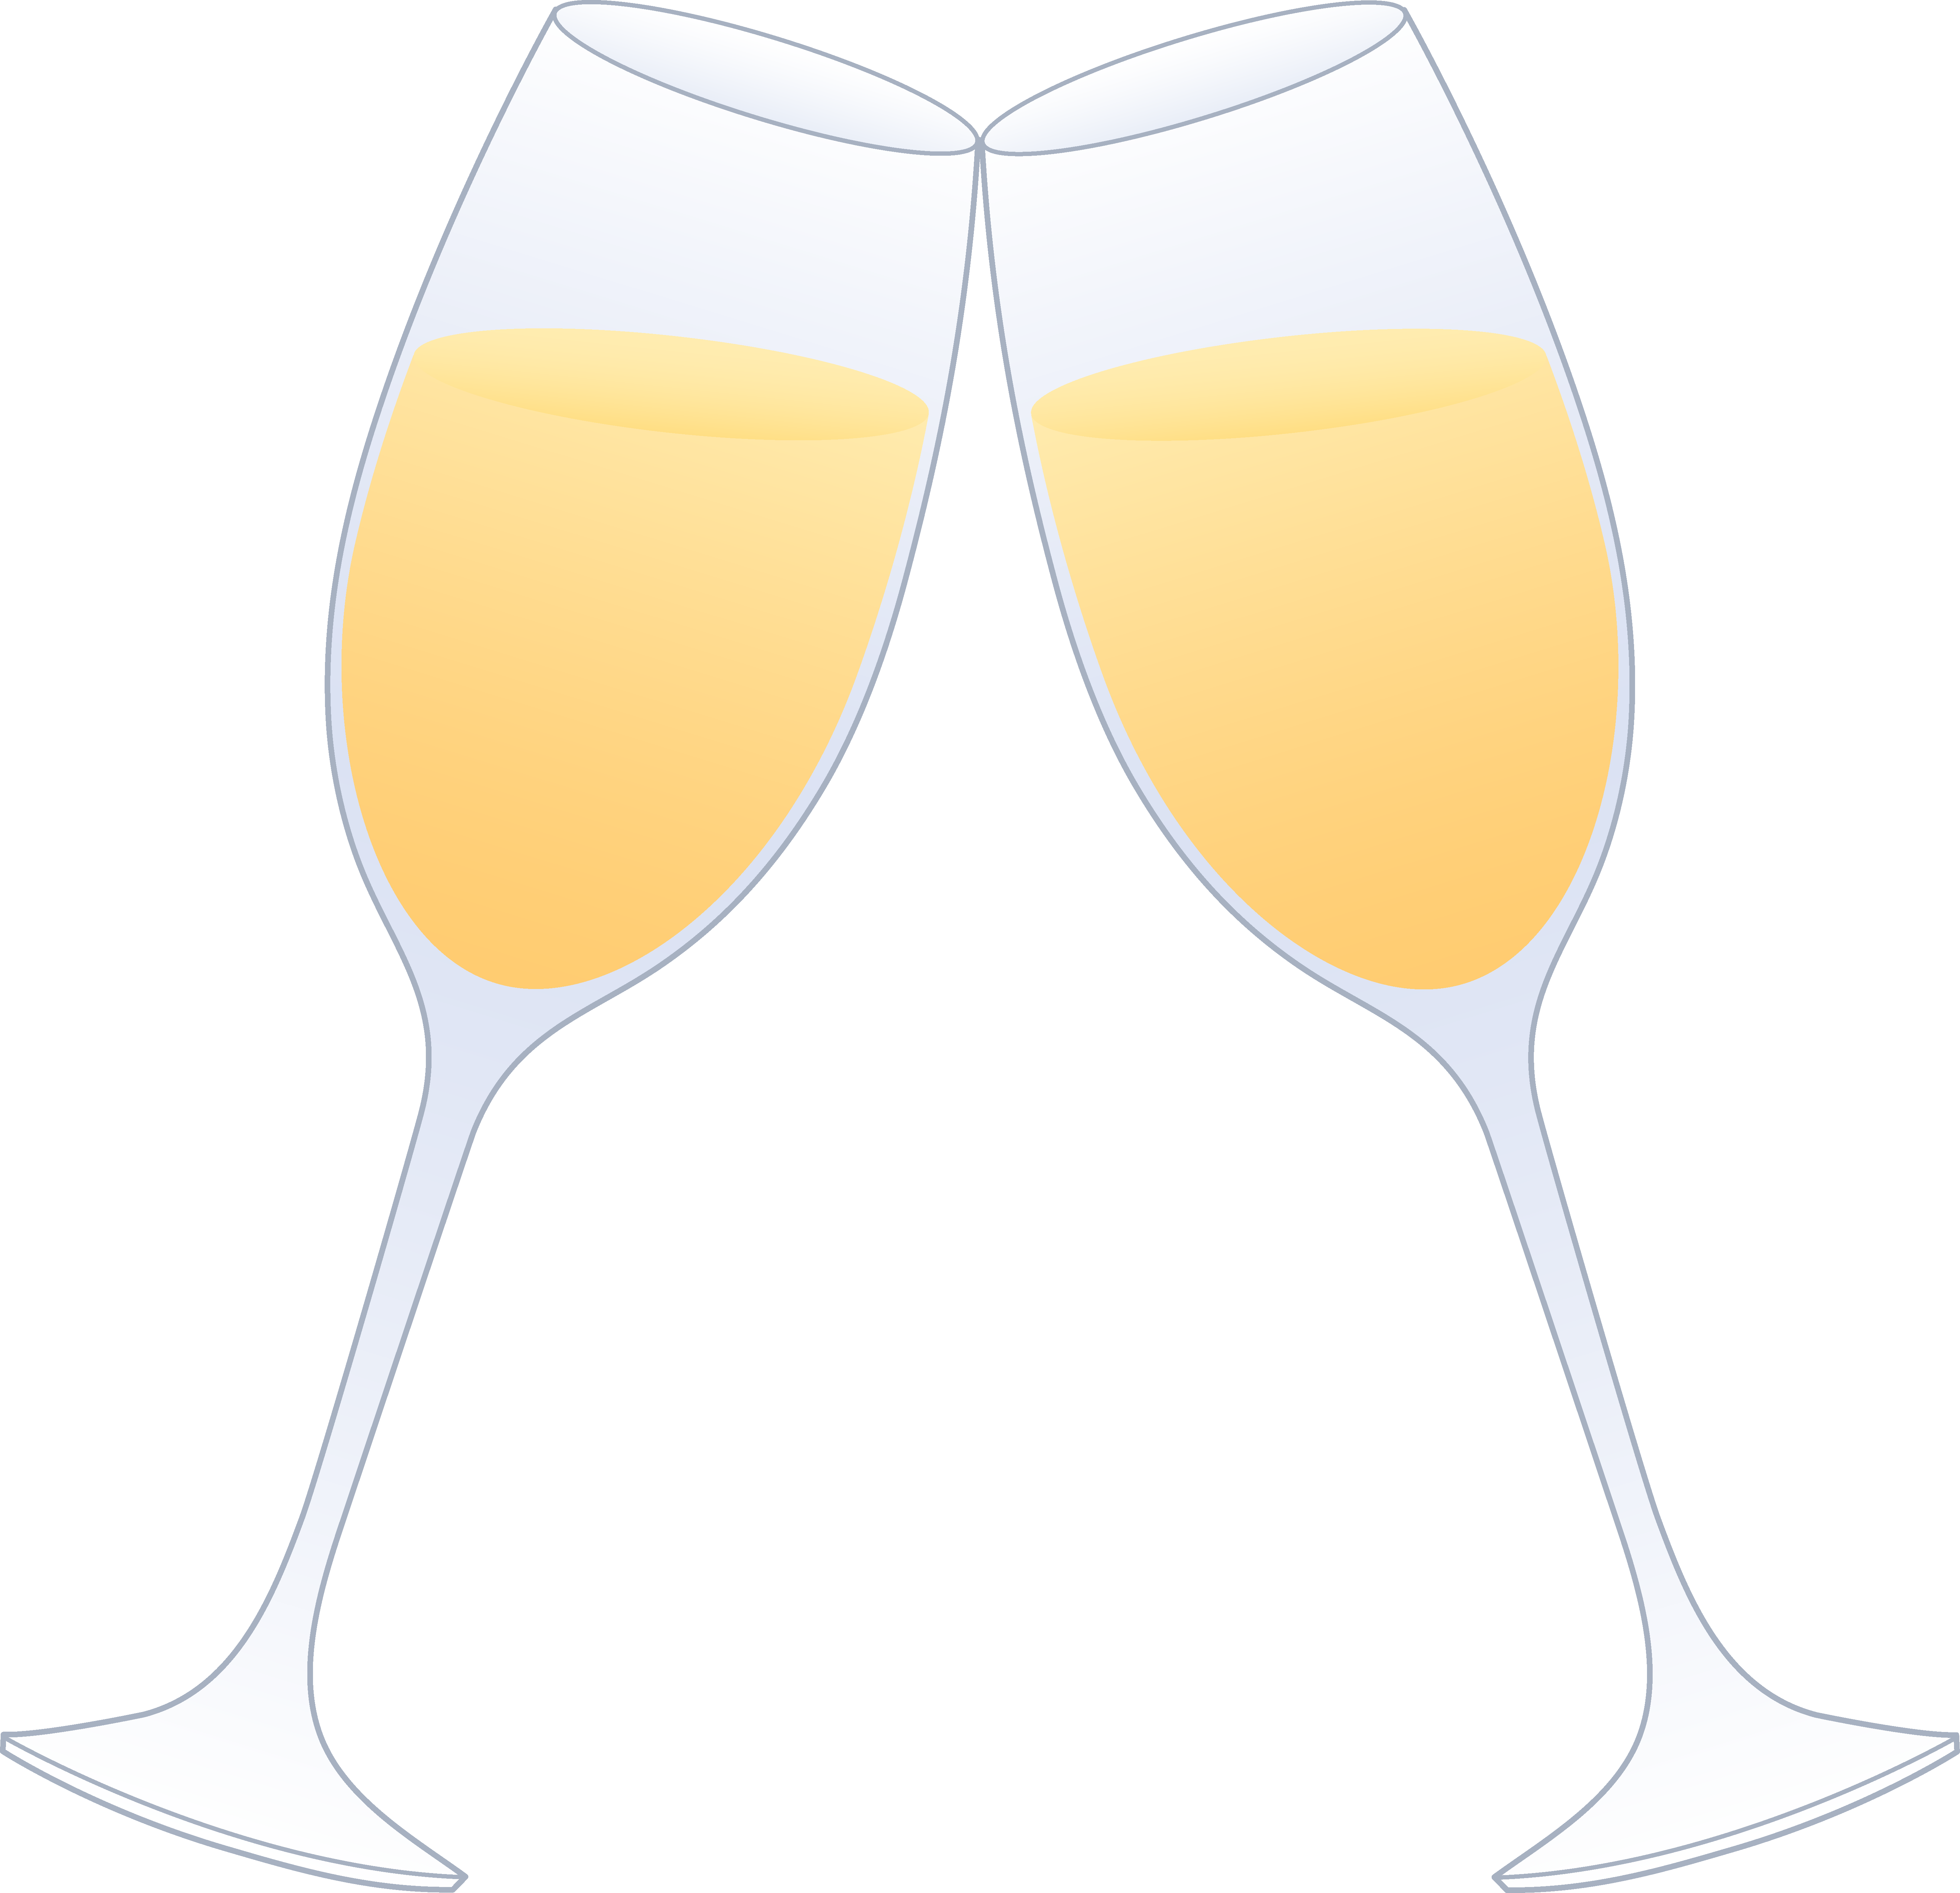 Champagne glass glasses of champagne clinking free clip art 2